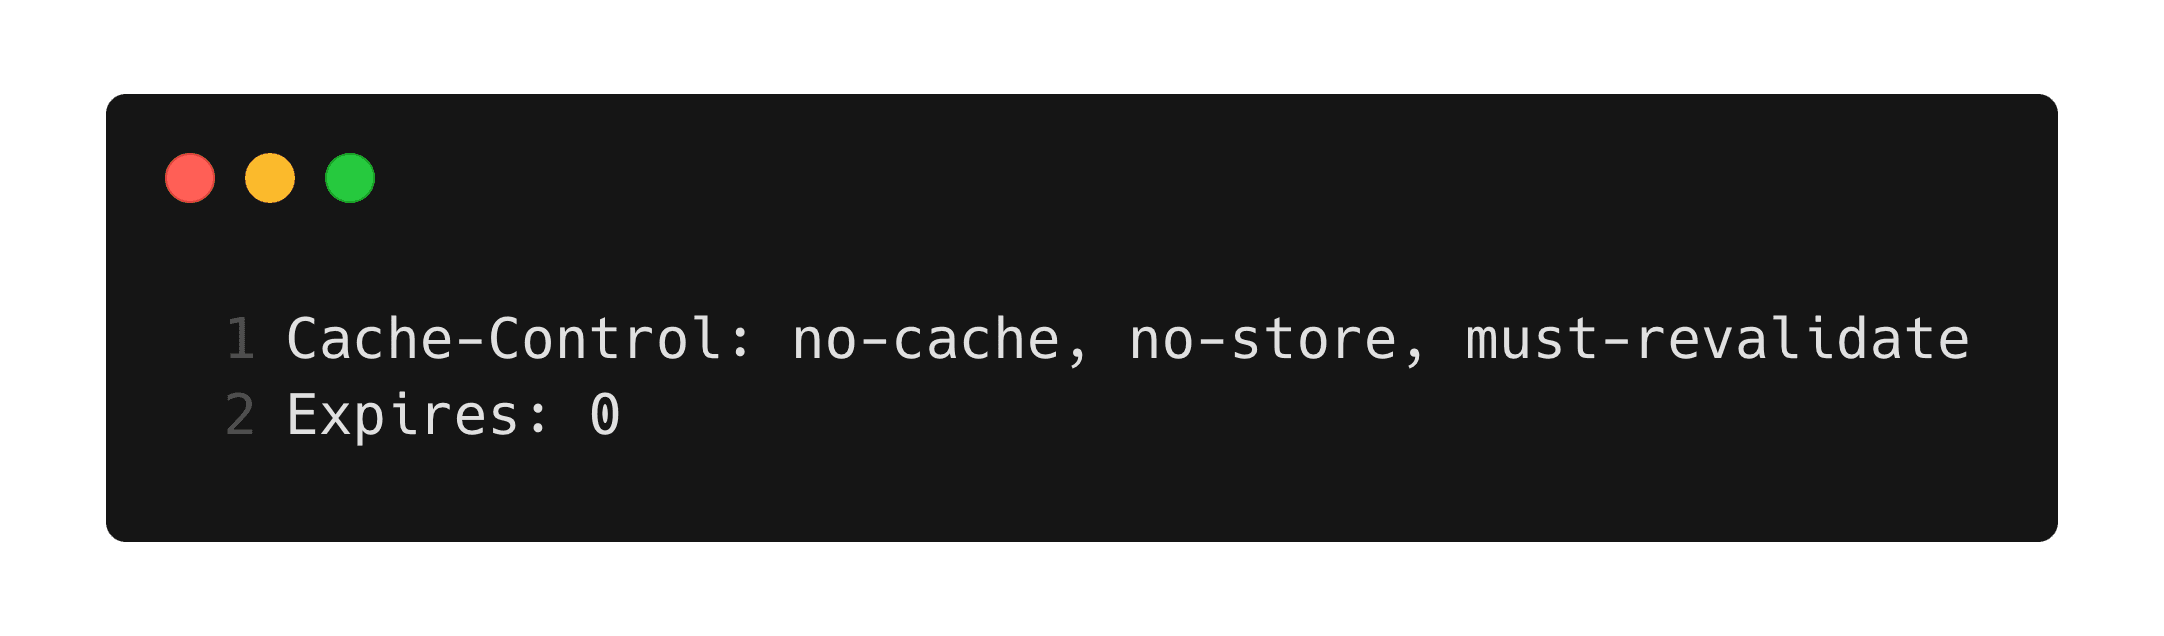 blog-breaking-caches-cb-03